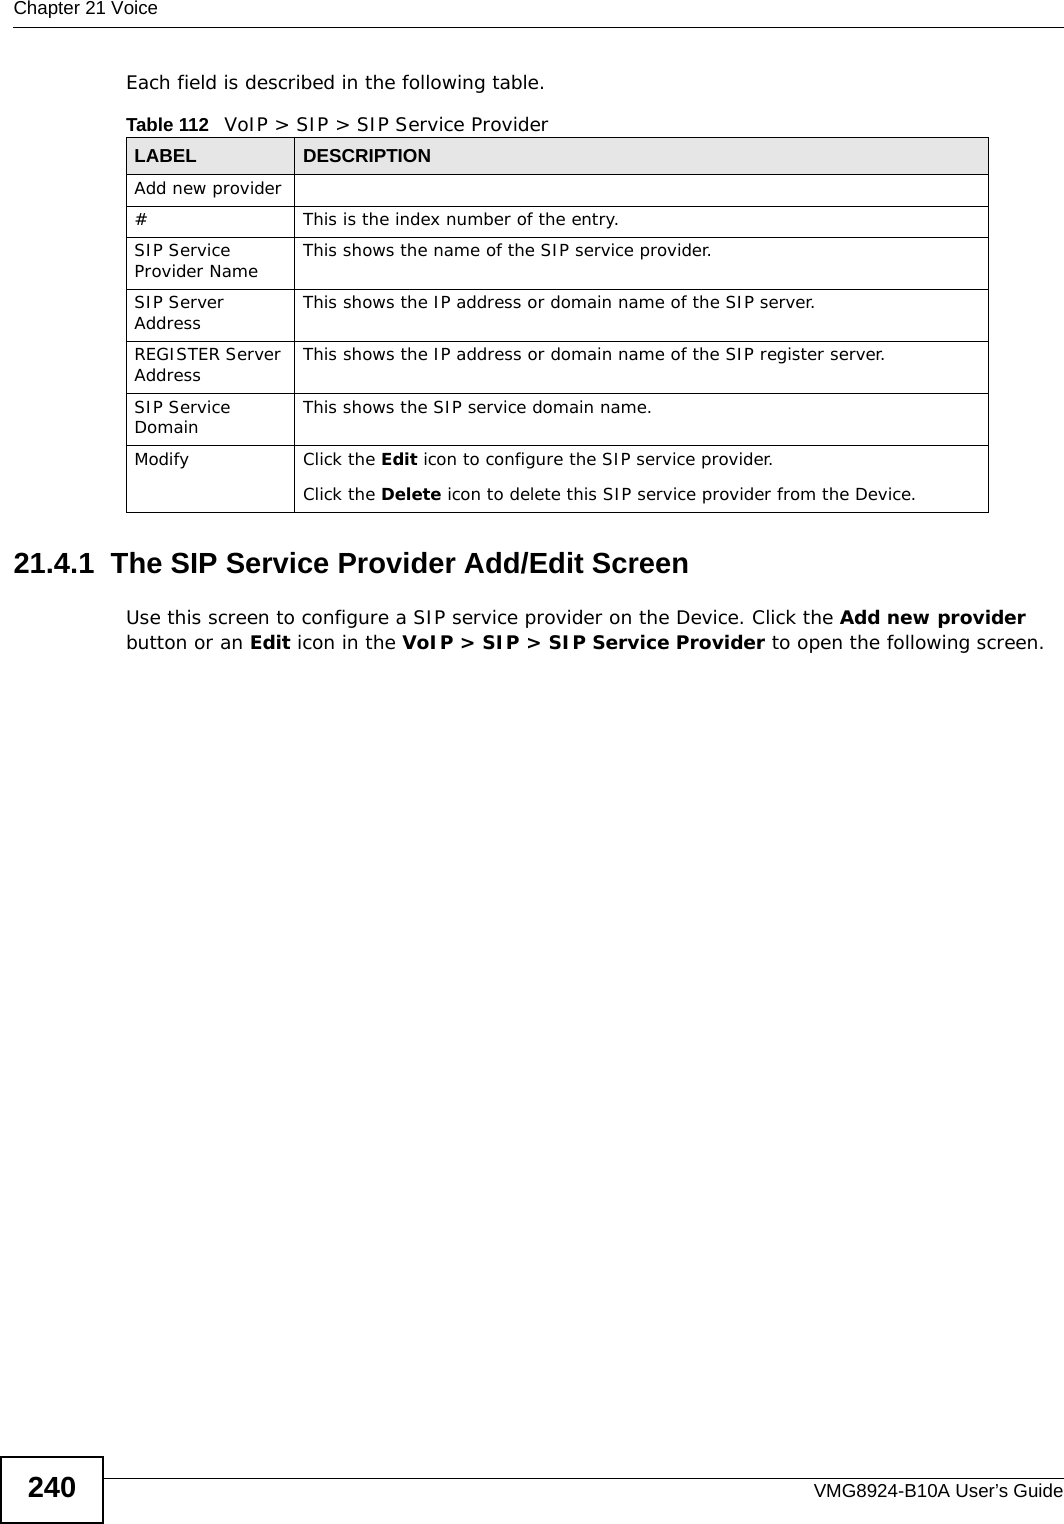 Chapter 21 VoiceVMG8924-B10A User’s Guide240Each field is described in the following table.21.4.1  The SIP Service Provider Add/Edit Screen Use this screen to configure a SIP service provider on the Device. Click the Add new provider button or an Edit icon in the VoIP &gt; SIP &gt; SIP Service Provider to open the following screen. Table 112   VoIP &gt; SIP &gt; SIP Service ProviderLABEL DESCRIPTIONAdd new provider# This is the index number of the entry.SIP Service Provider Name  This shows the name of the SIP service provider.SIP Server Address This shows the IP address or domain name of the SIP server.REGISTER Server Address This shows the IP address or domain name of the SIP register server.SIP Service Domain This shows the SIP service domain name.Modify Click the Edit icon to configure the SIP service provider.Click the Delete icon to delete this SIP service provider from the Device. 